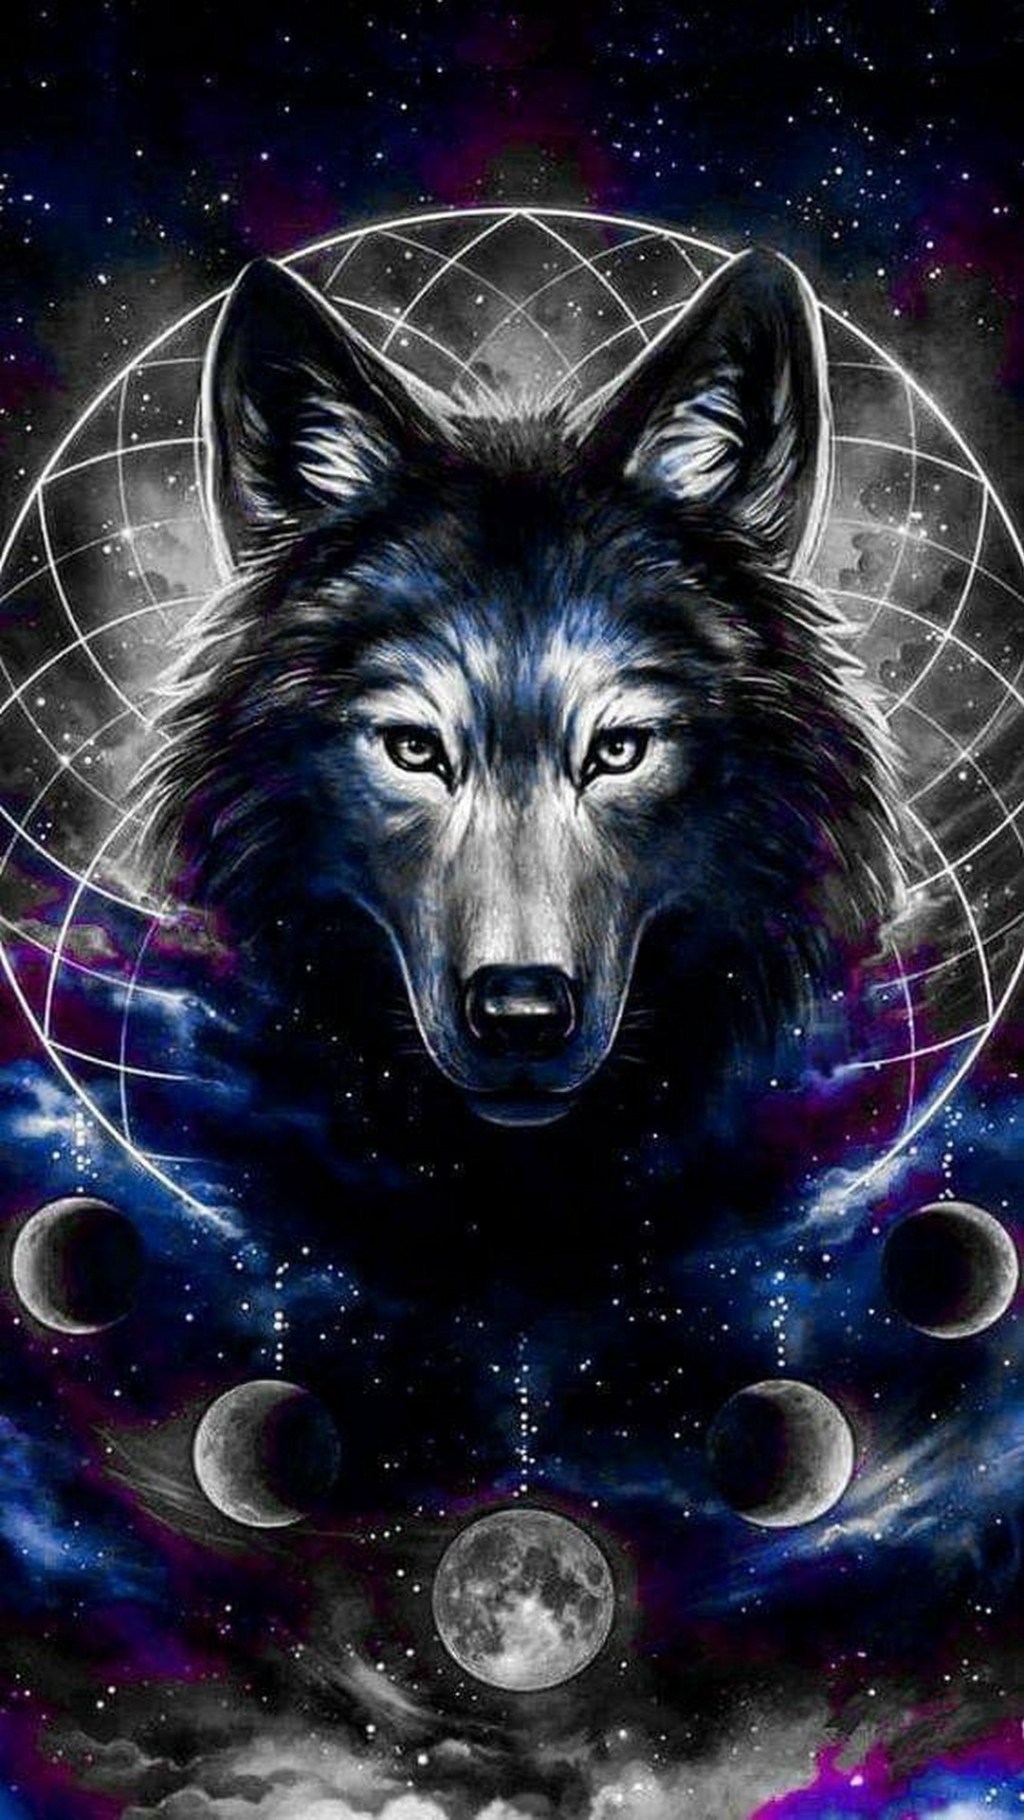 Black Wolf IPhone Wallpaper  IPhone Wallpapers  iPhone Wallpapers